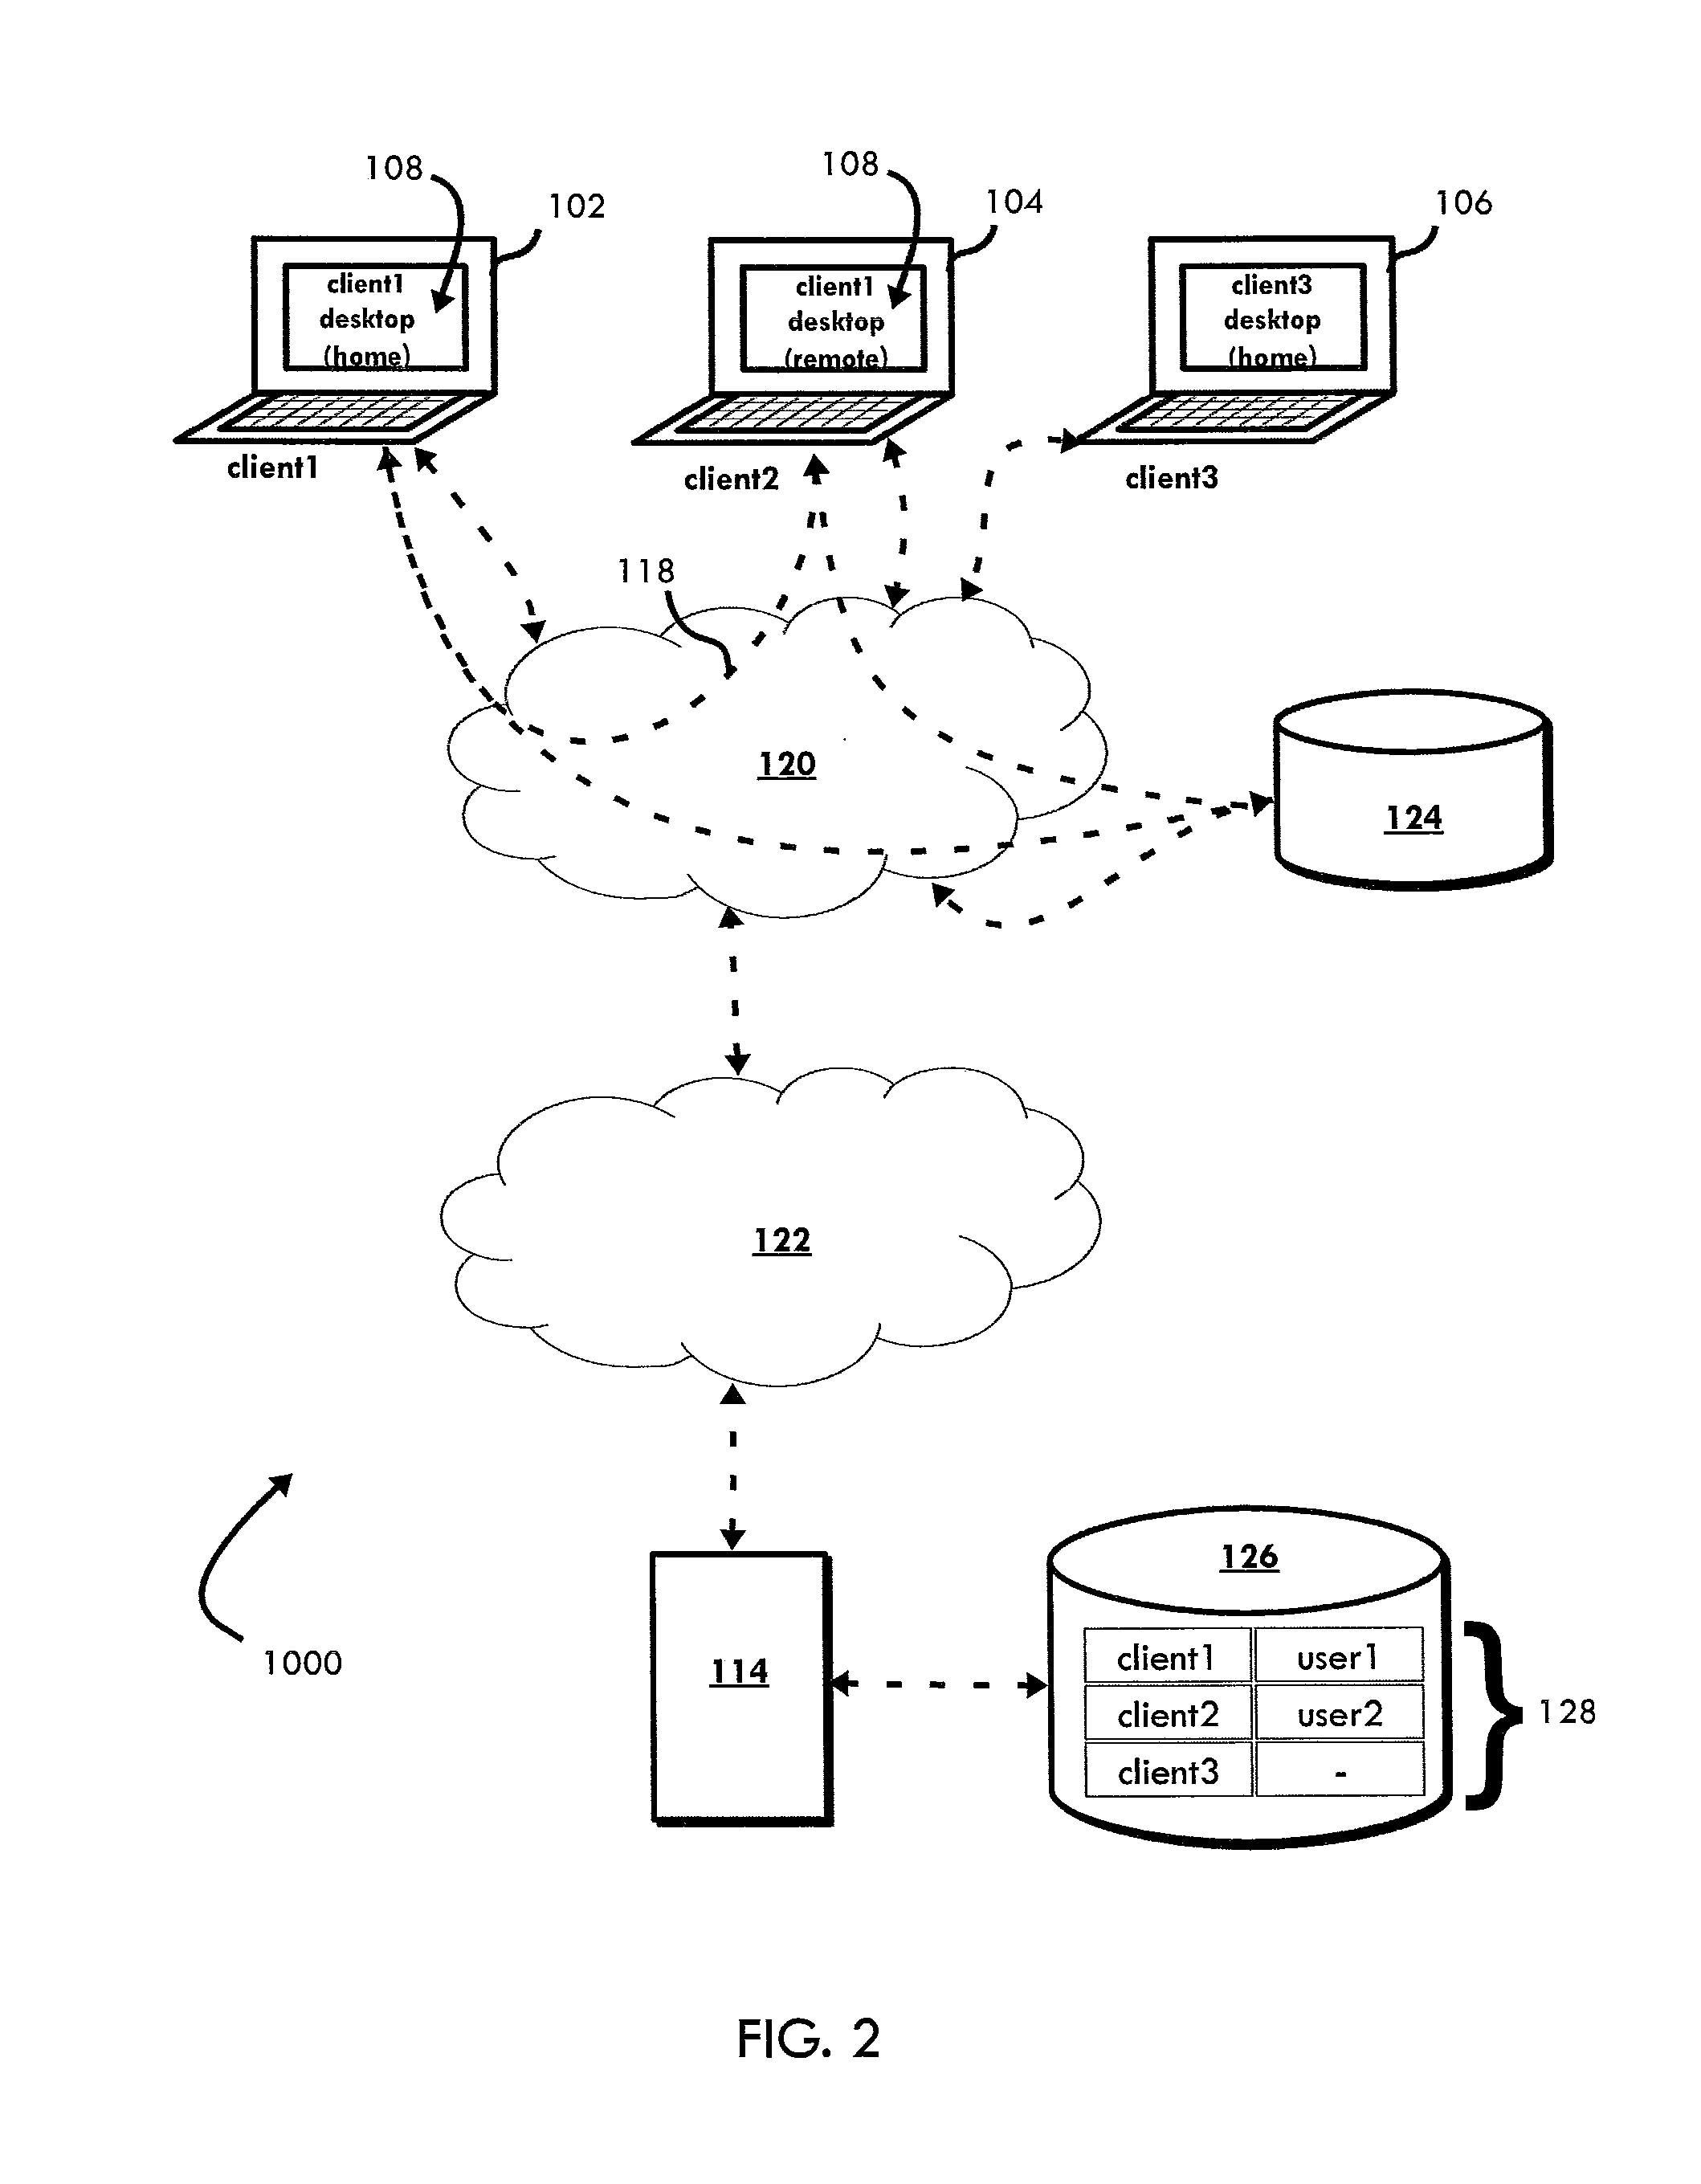 System and Method for a Distributed Virtual Desktop Infrastructure